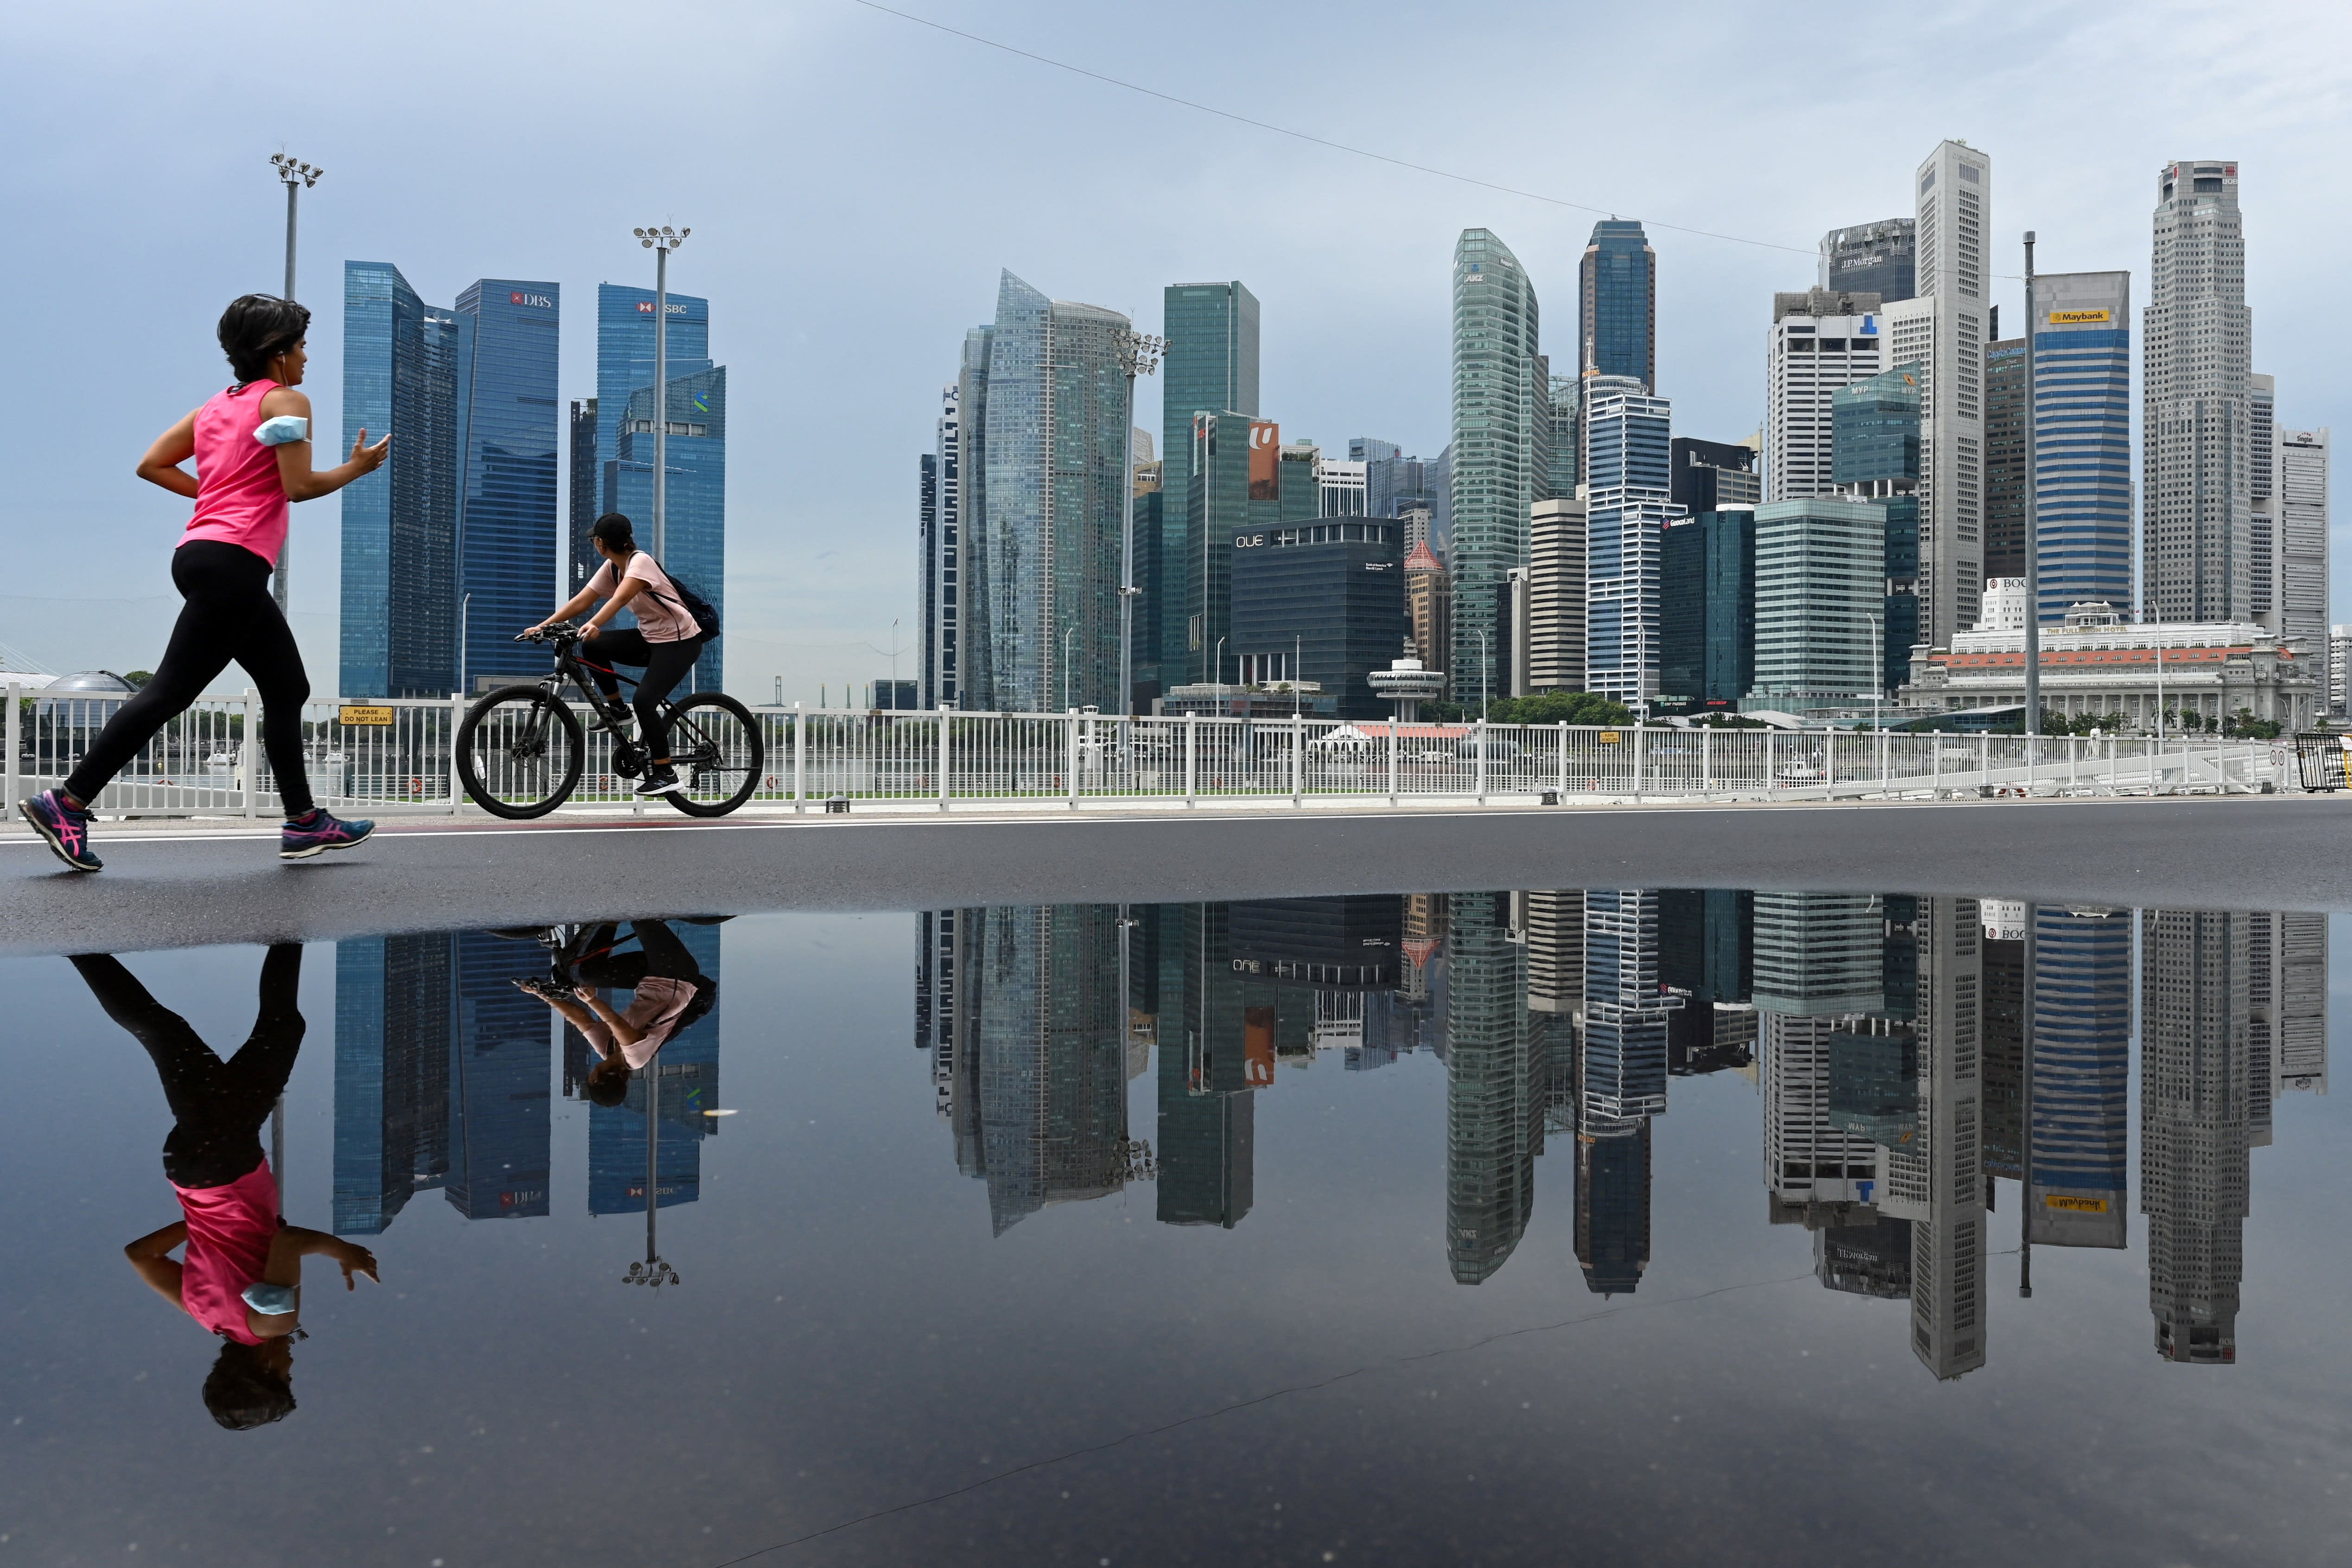 The Singapore economy's 7.6 per cent growth in 2021 is a rebound from the 4.1 per cent contraction in 2020, the Ministry of Trade and Industry said.